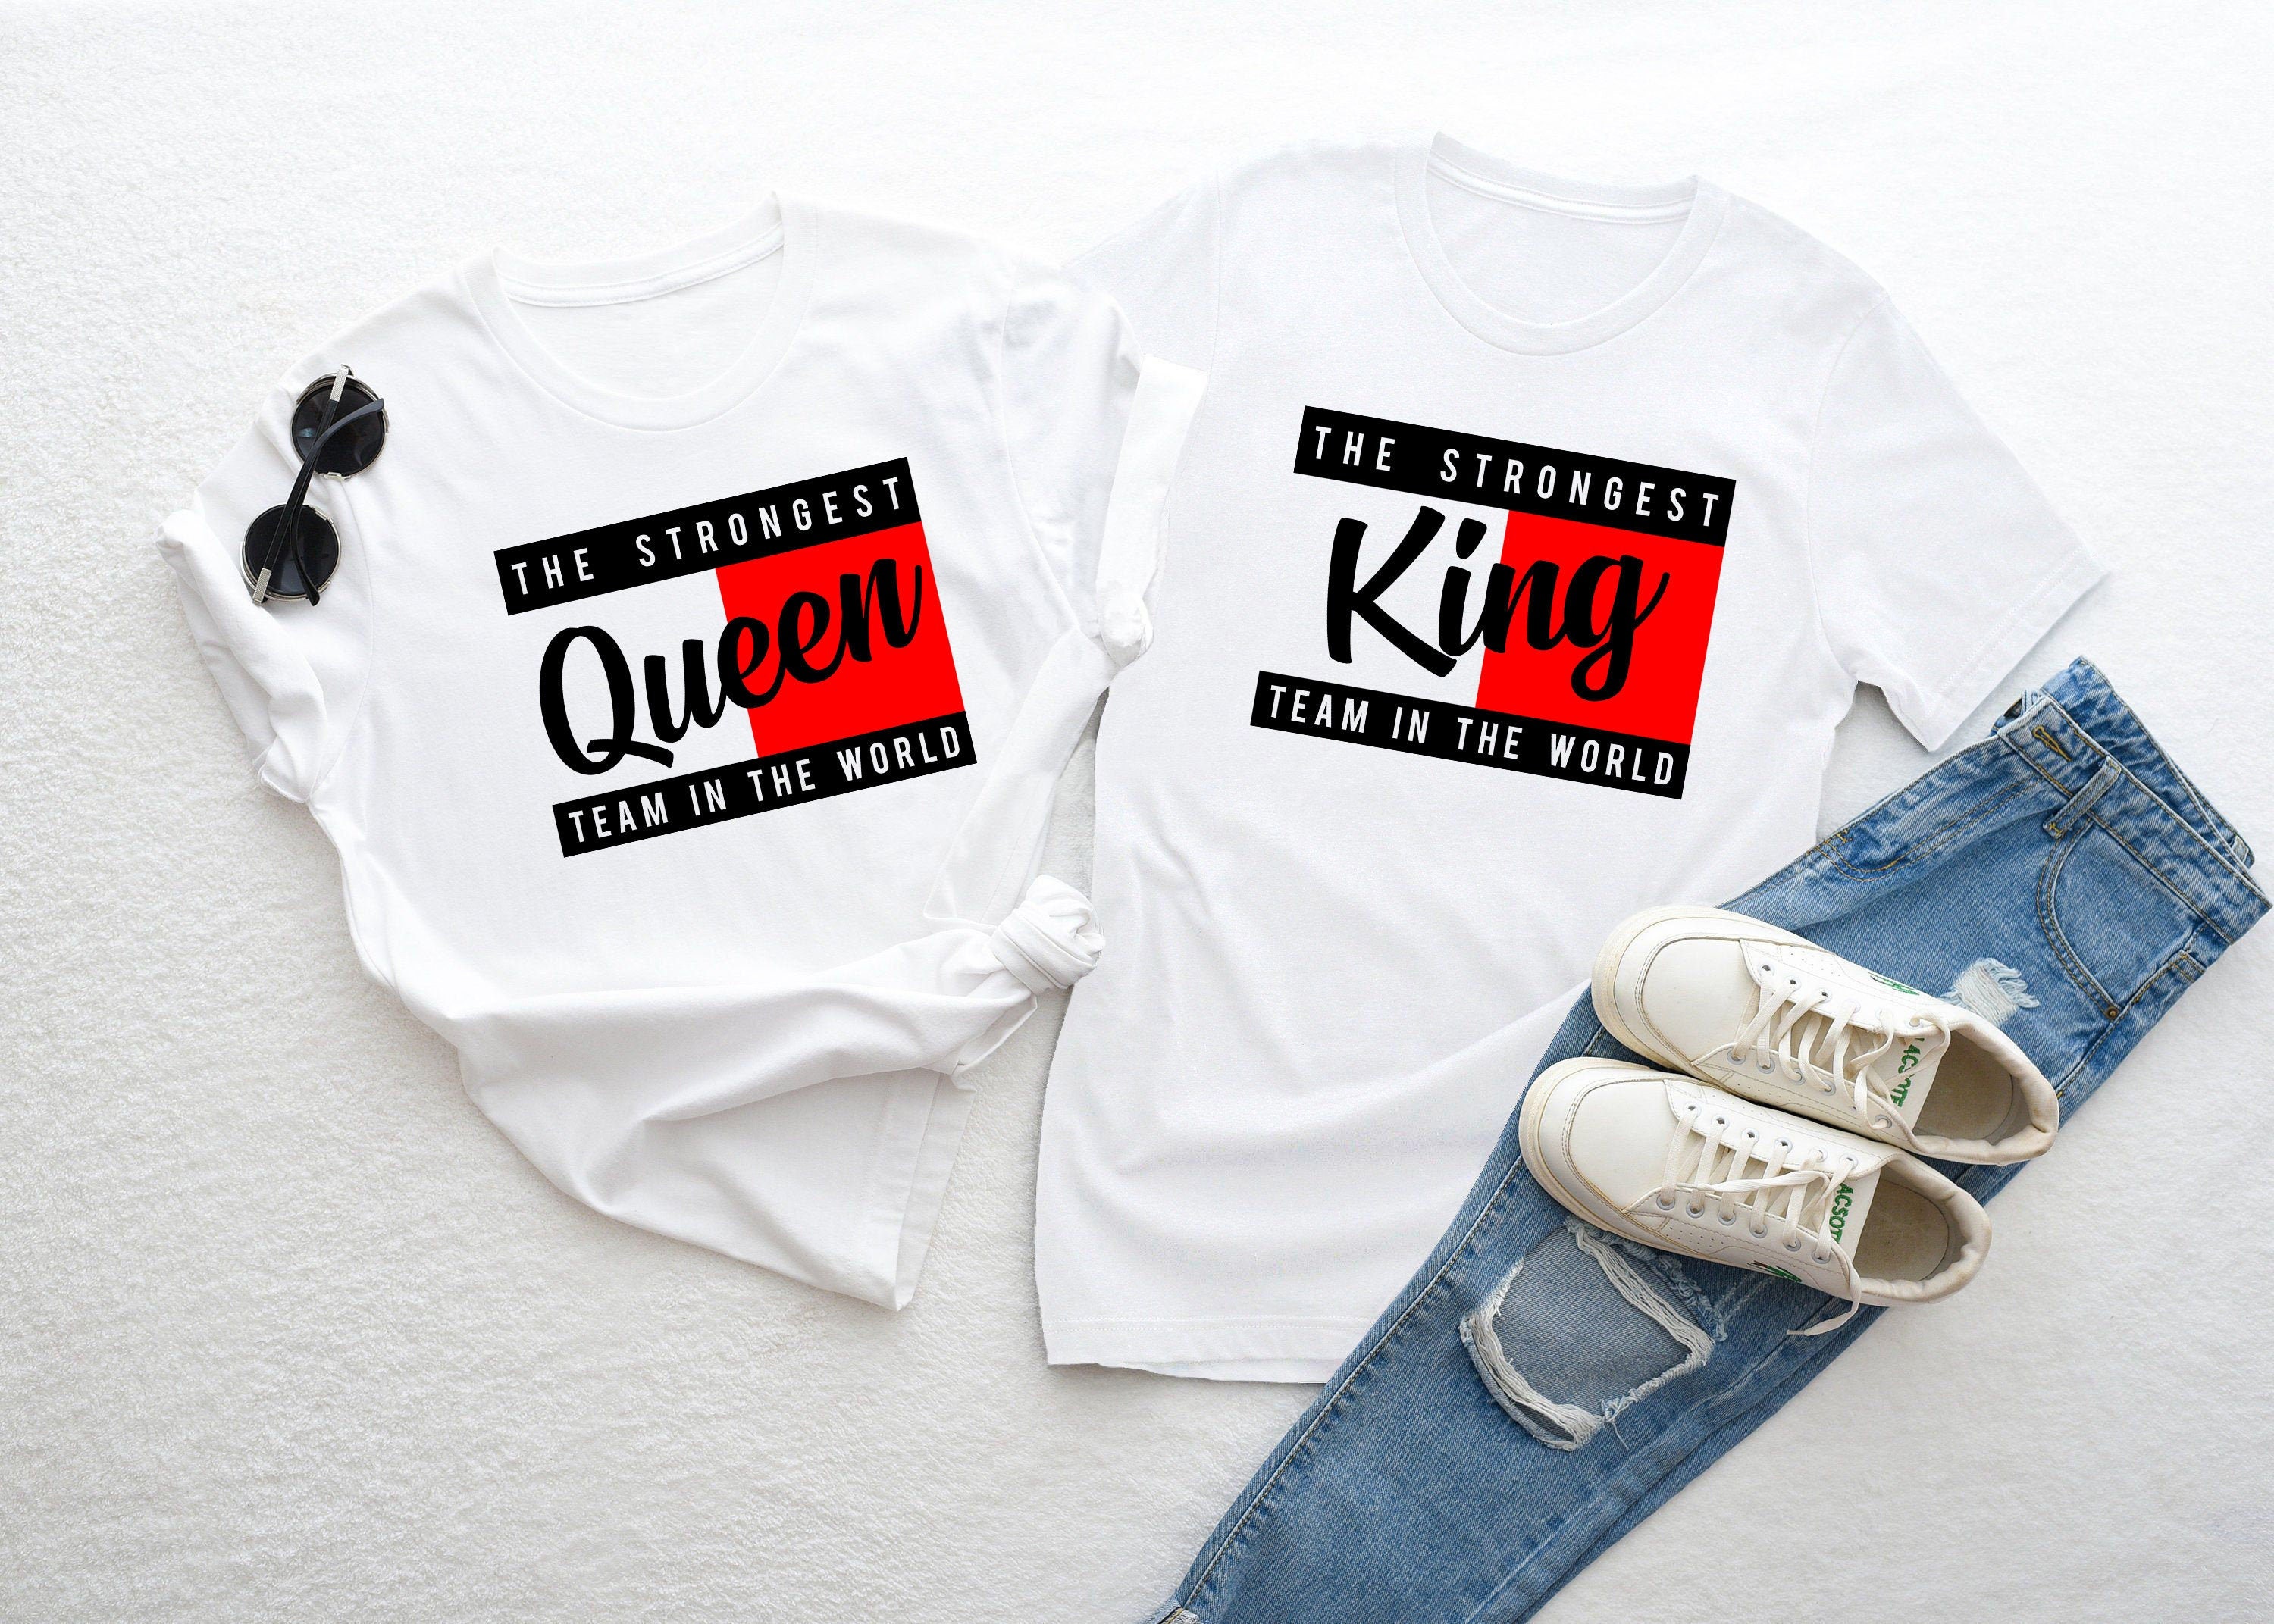 Enig med alder Dekan King Queen Shirts King and Queen T-shirts Couples Shirts | Etsy